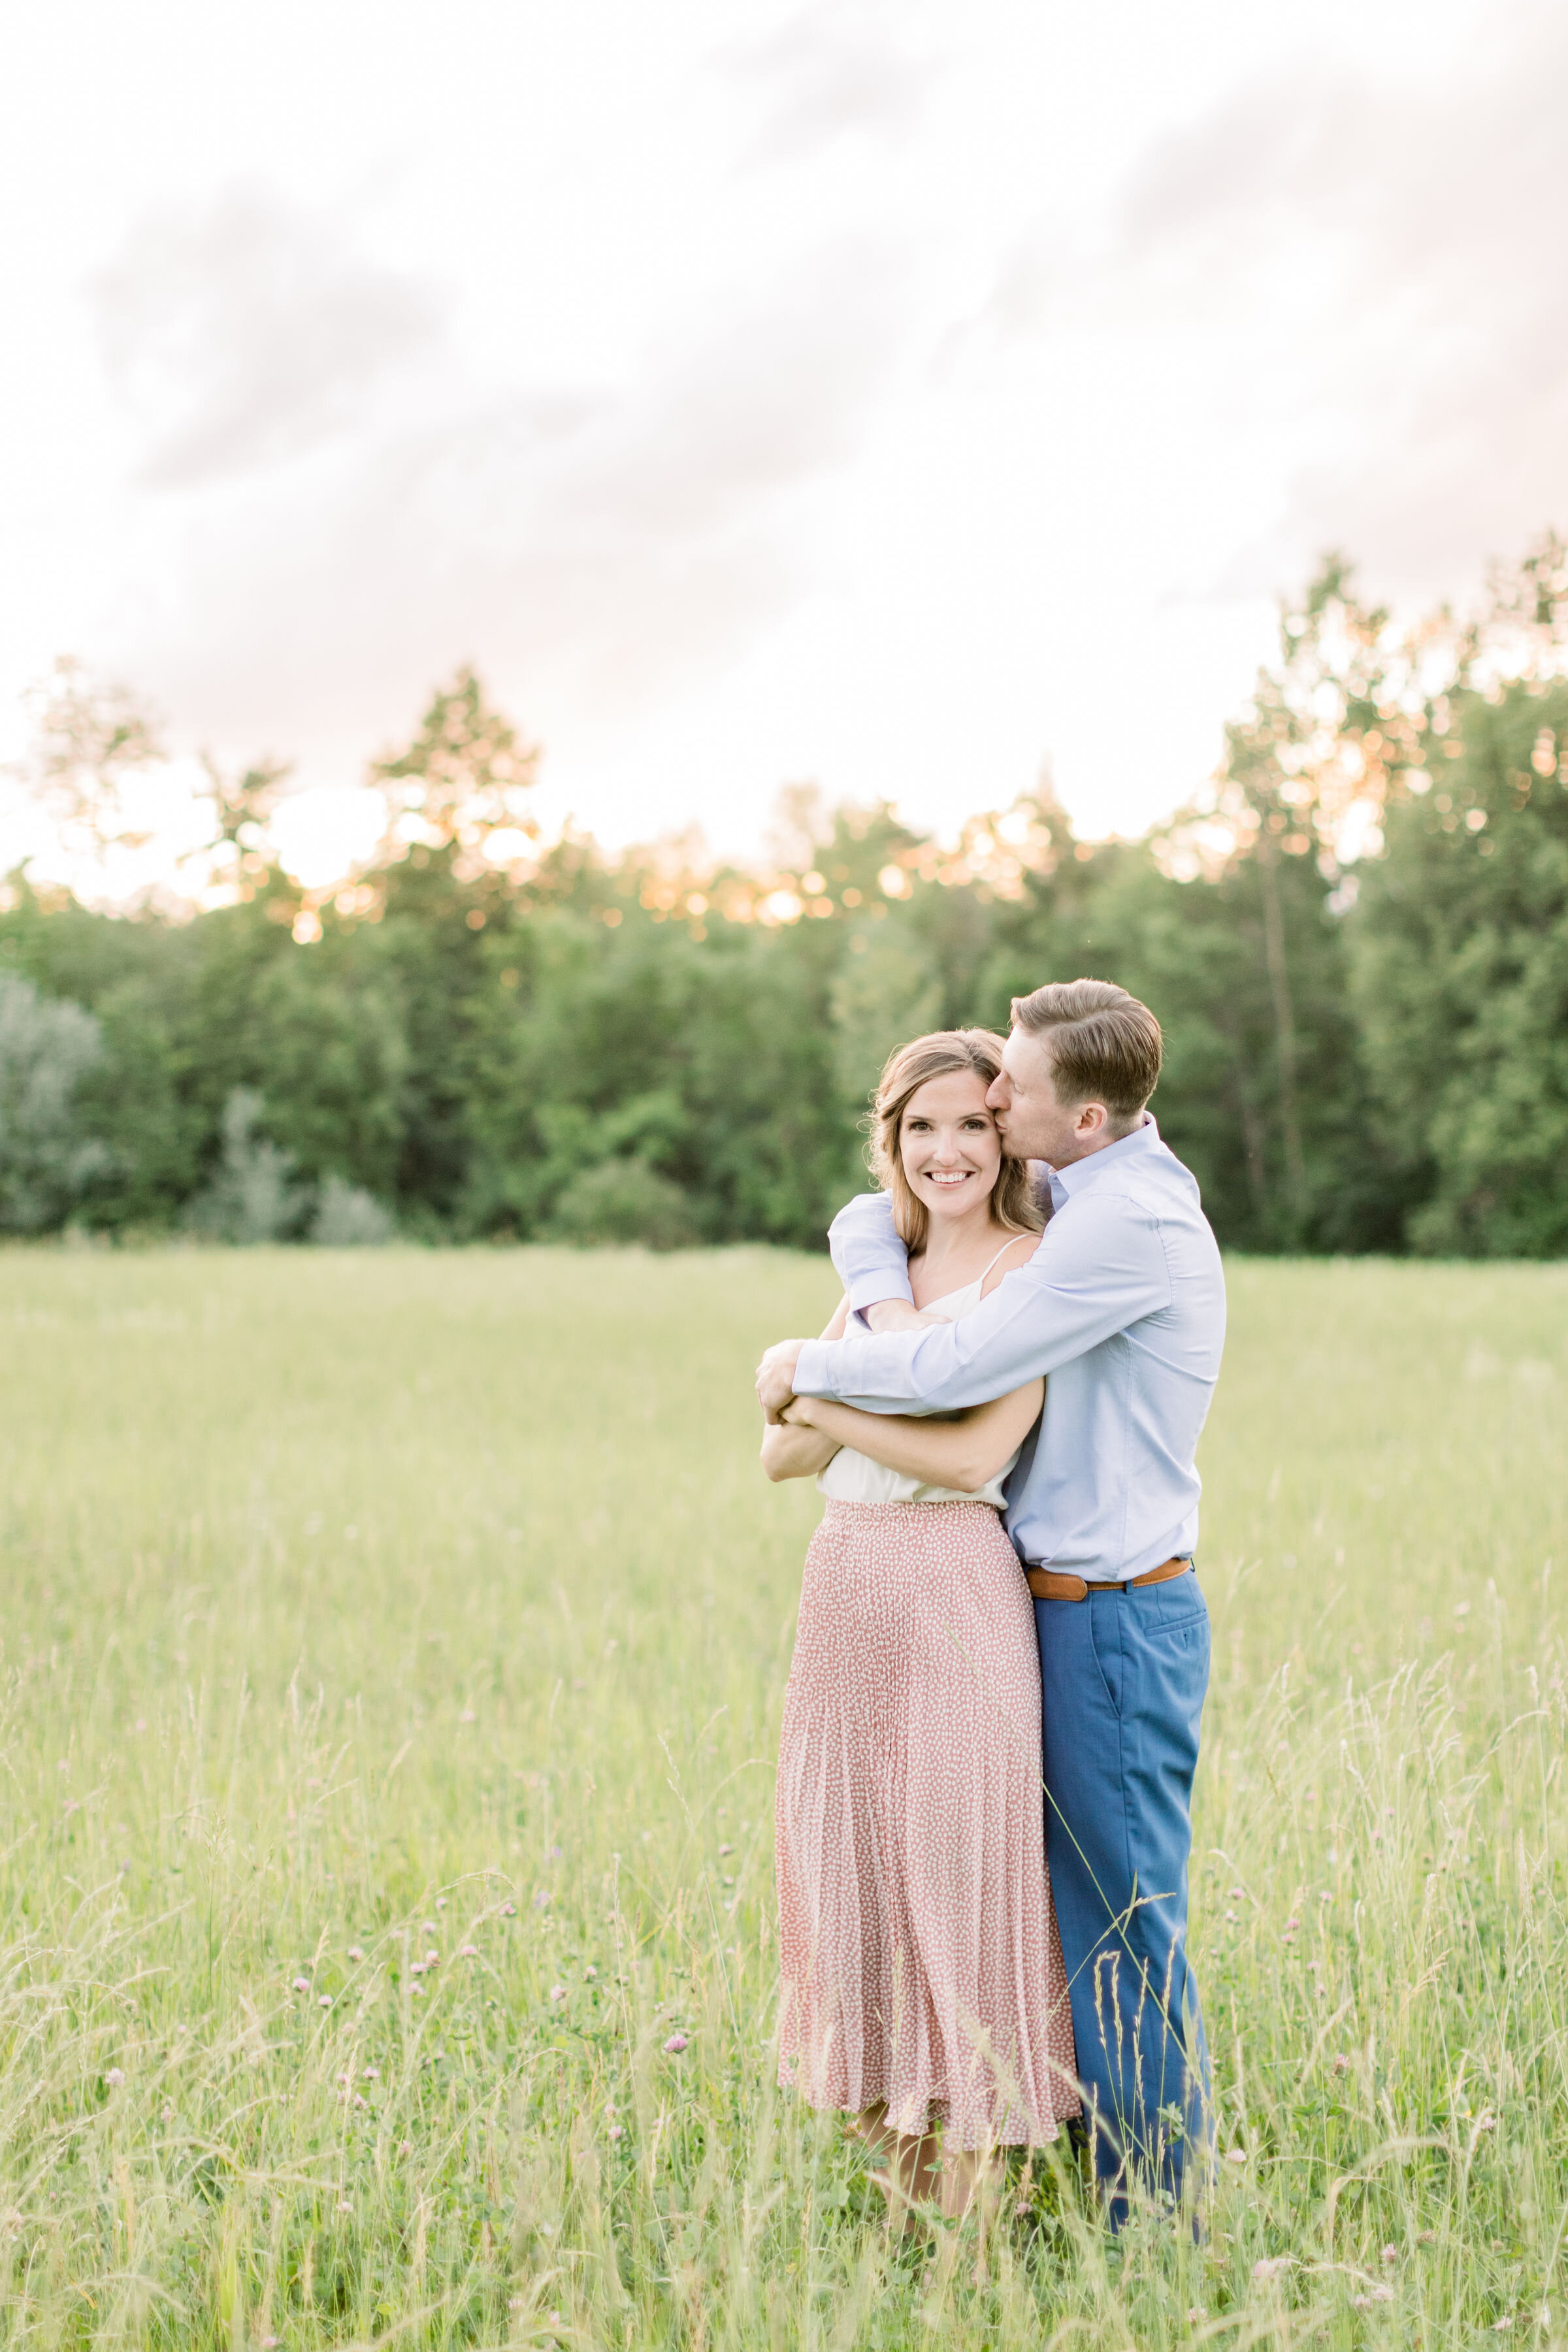  Perfect outdoor location for engagement photo shoot with grass field and treelined horizon in Ottawa, ON by Chelsea Mason Photograpy. tree lined horizon grass fields outdoor wedding photoshoots engagements outdoors in ottawa summer engagement photos